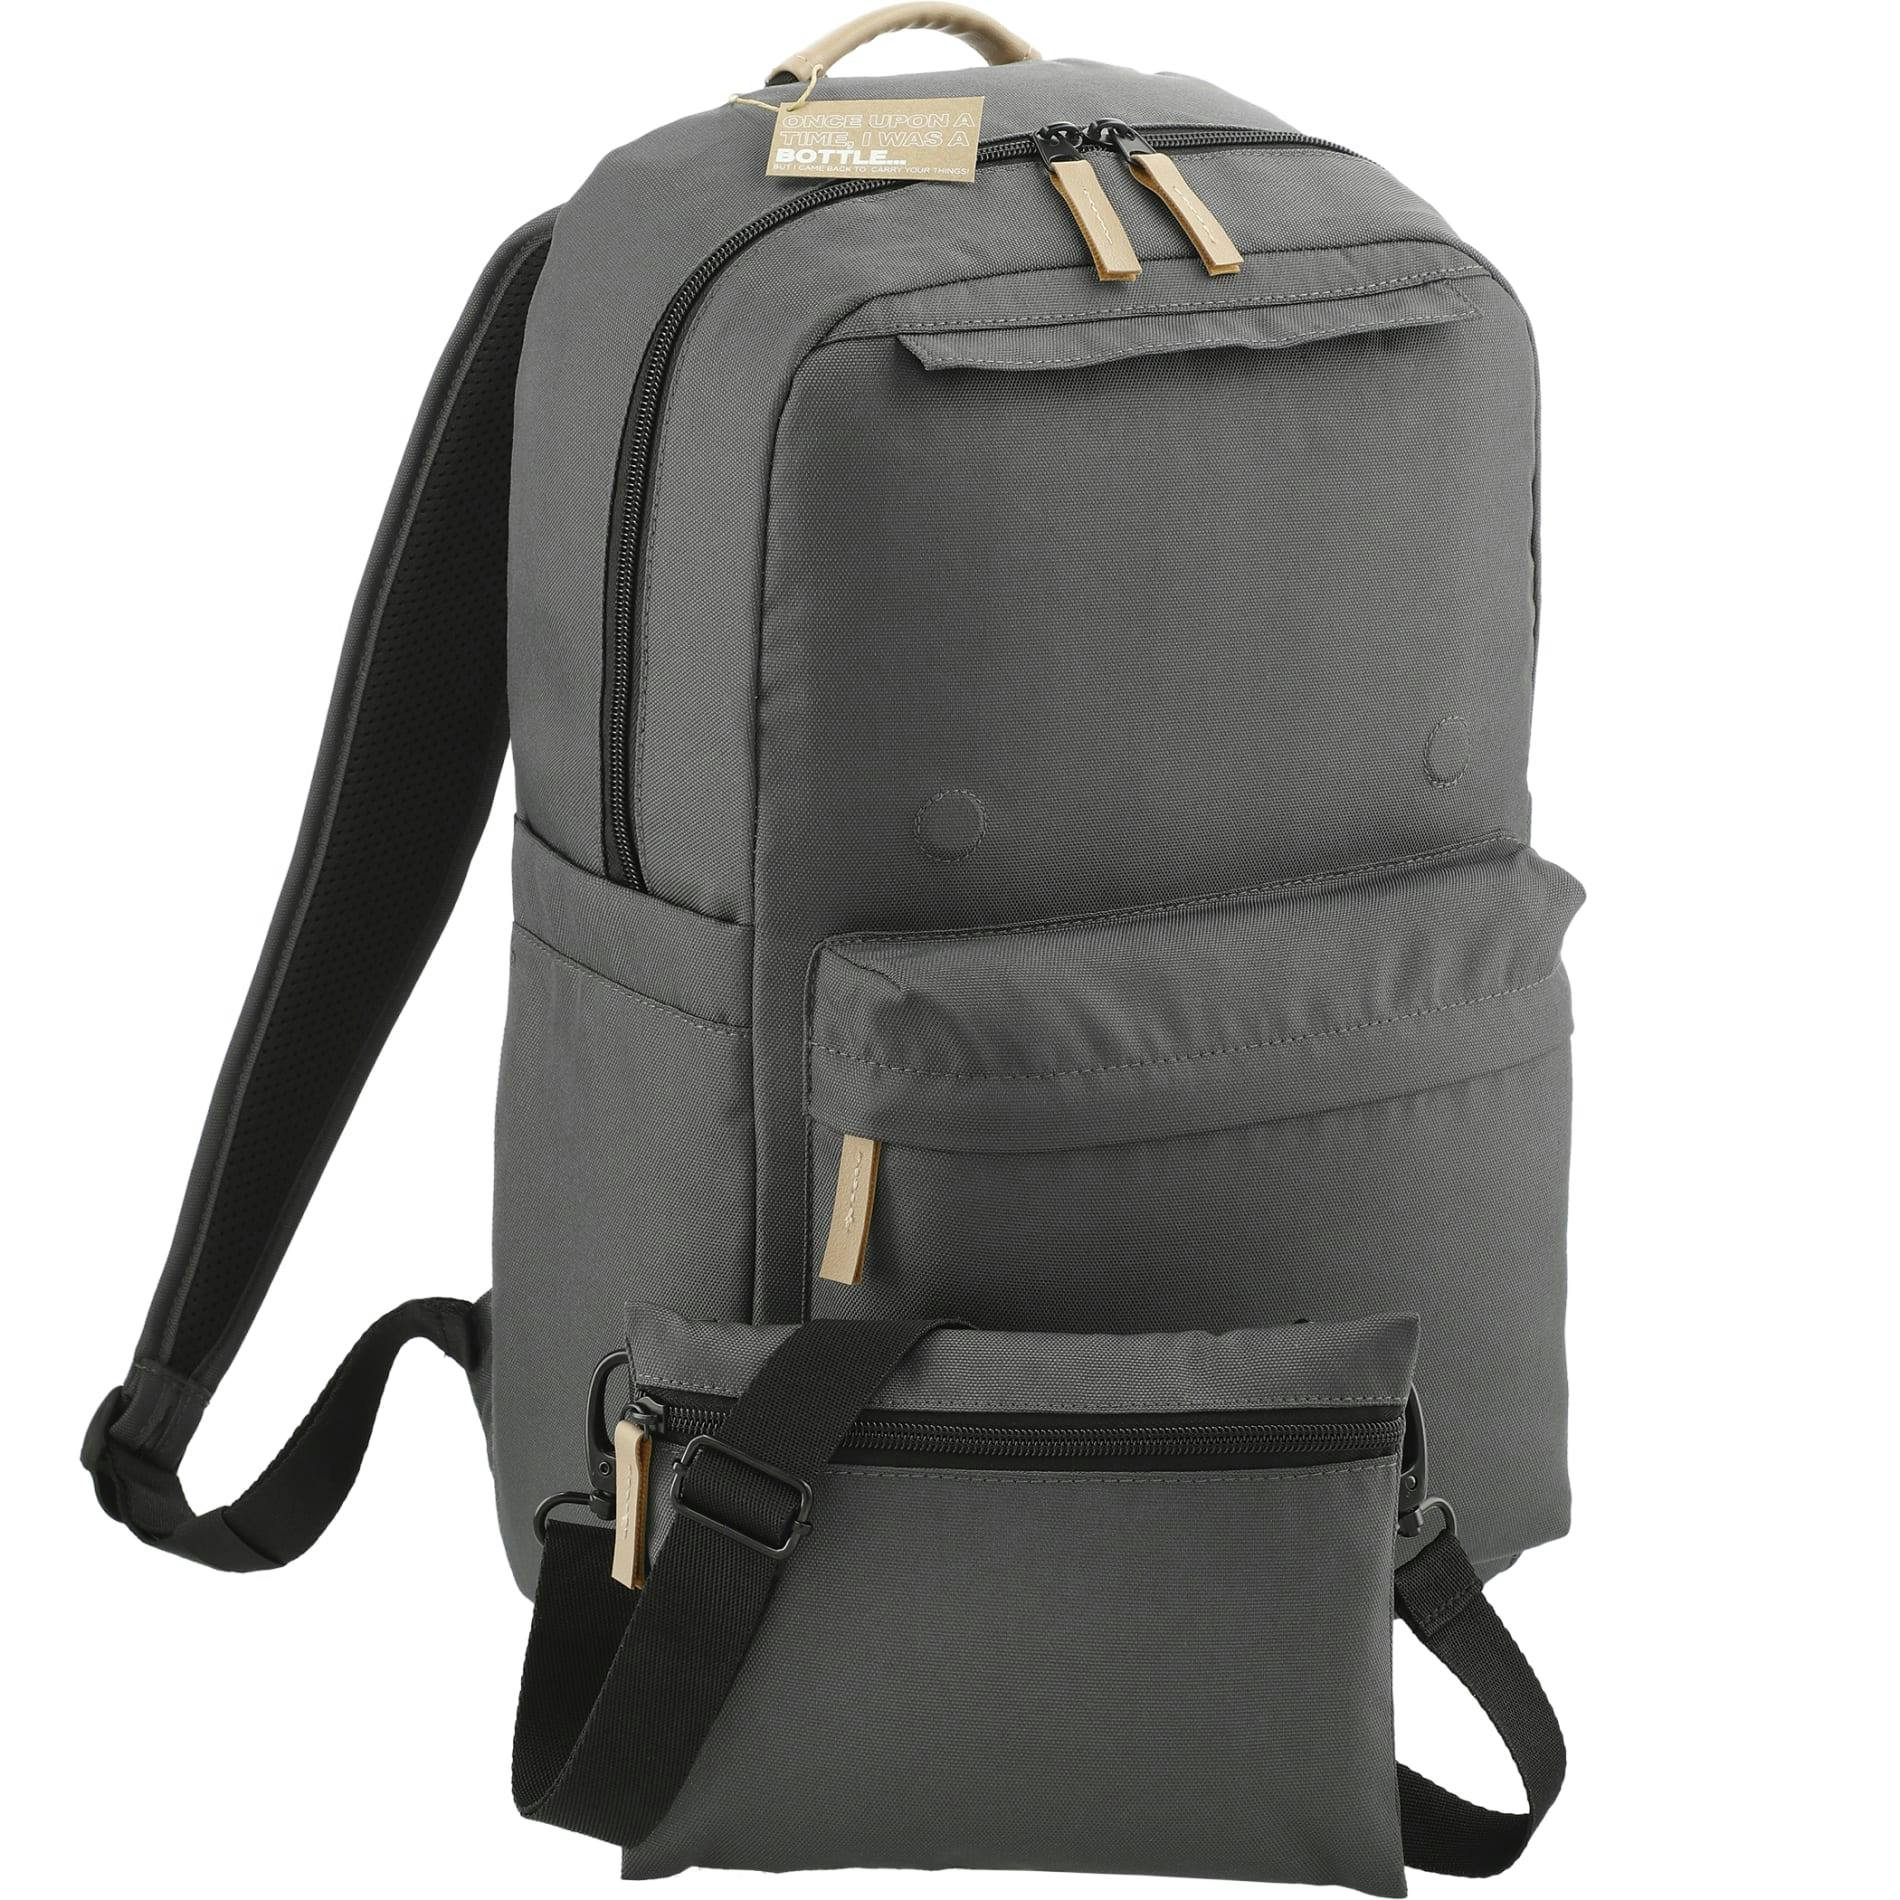 Aft Recycled 15" Computer Modular Backpack - additional Image 1